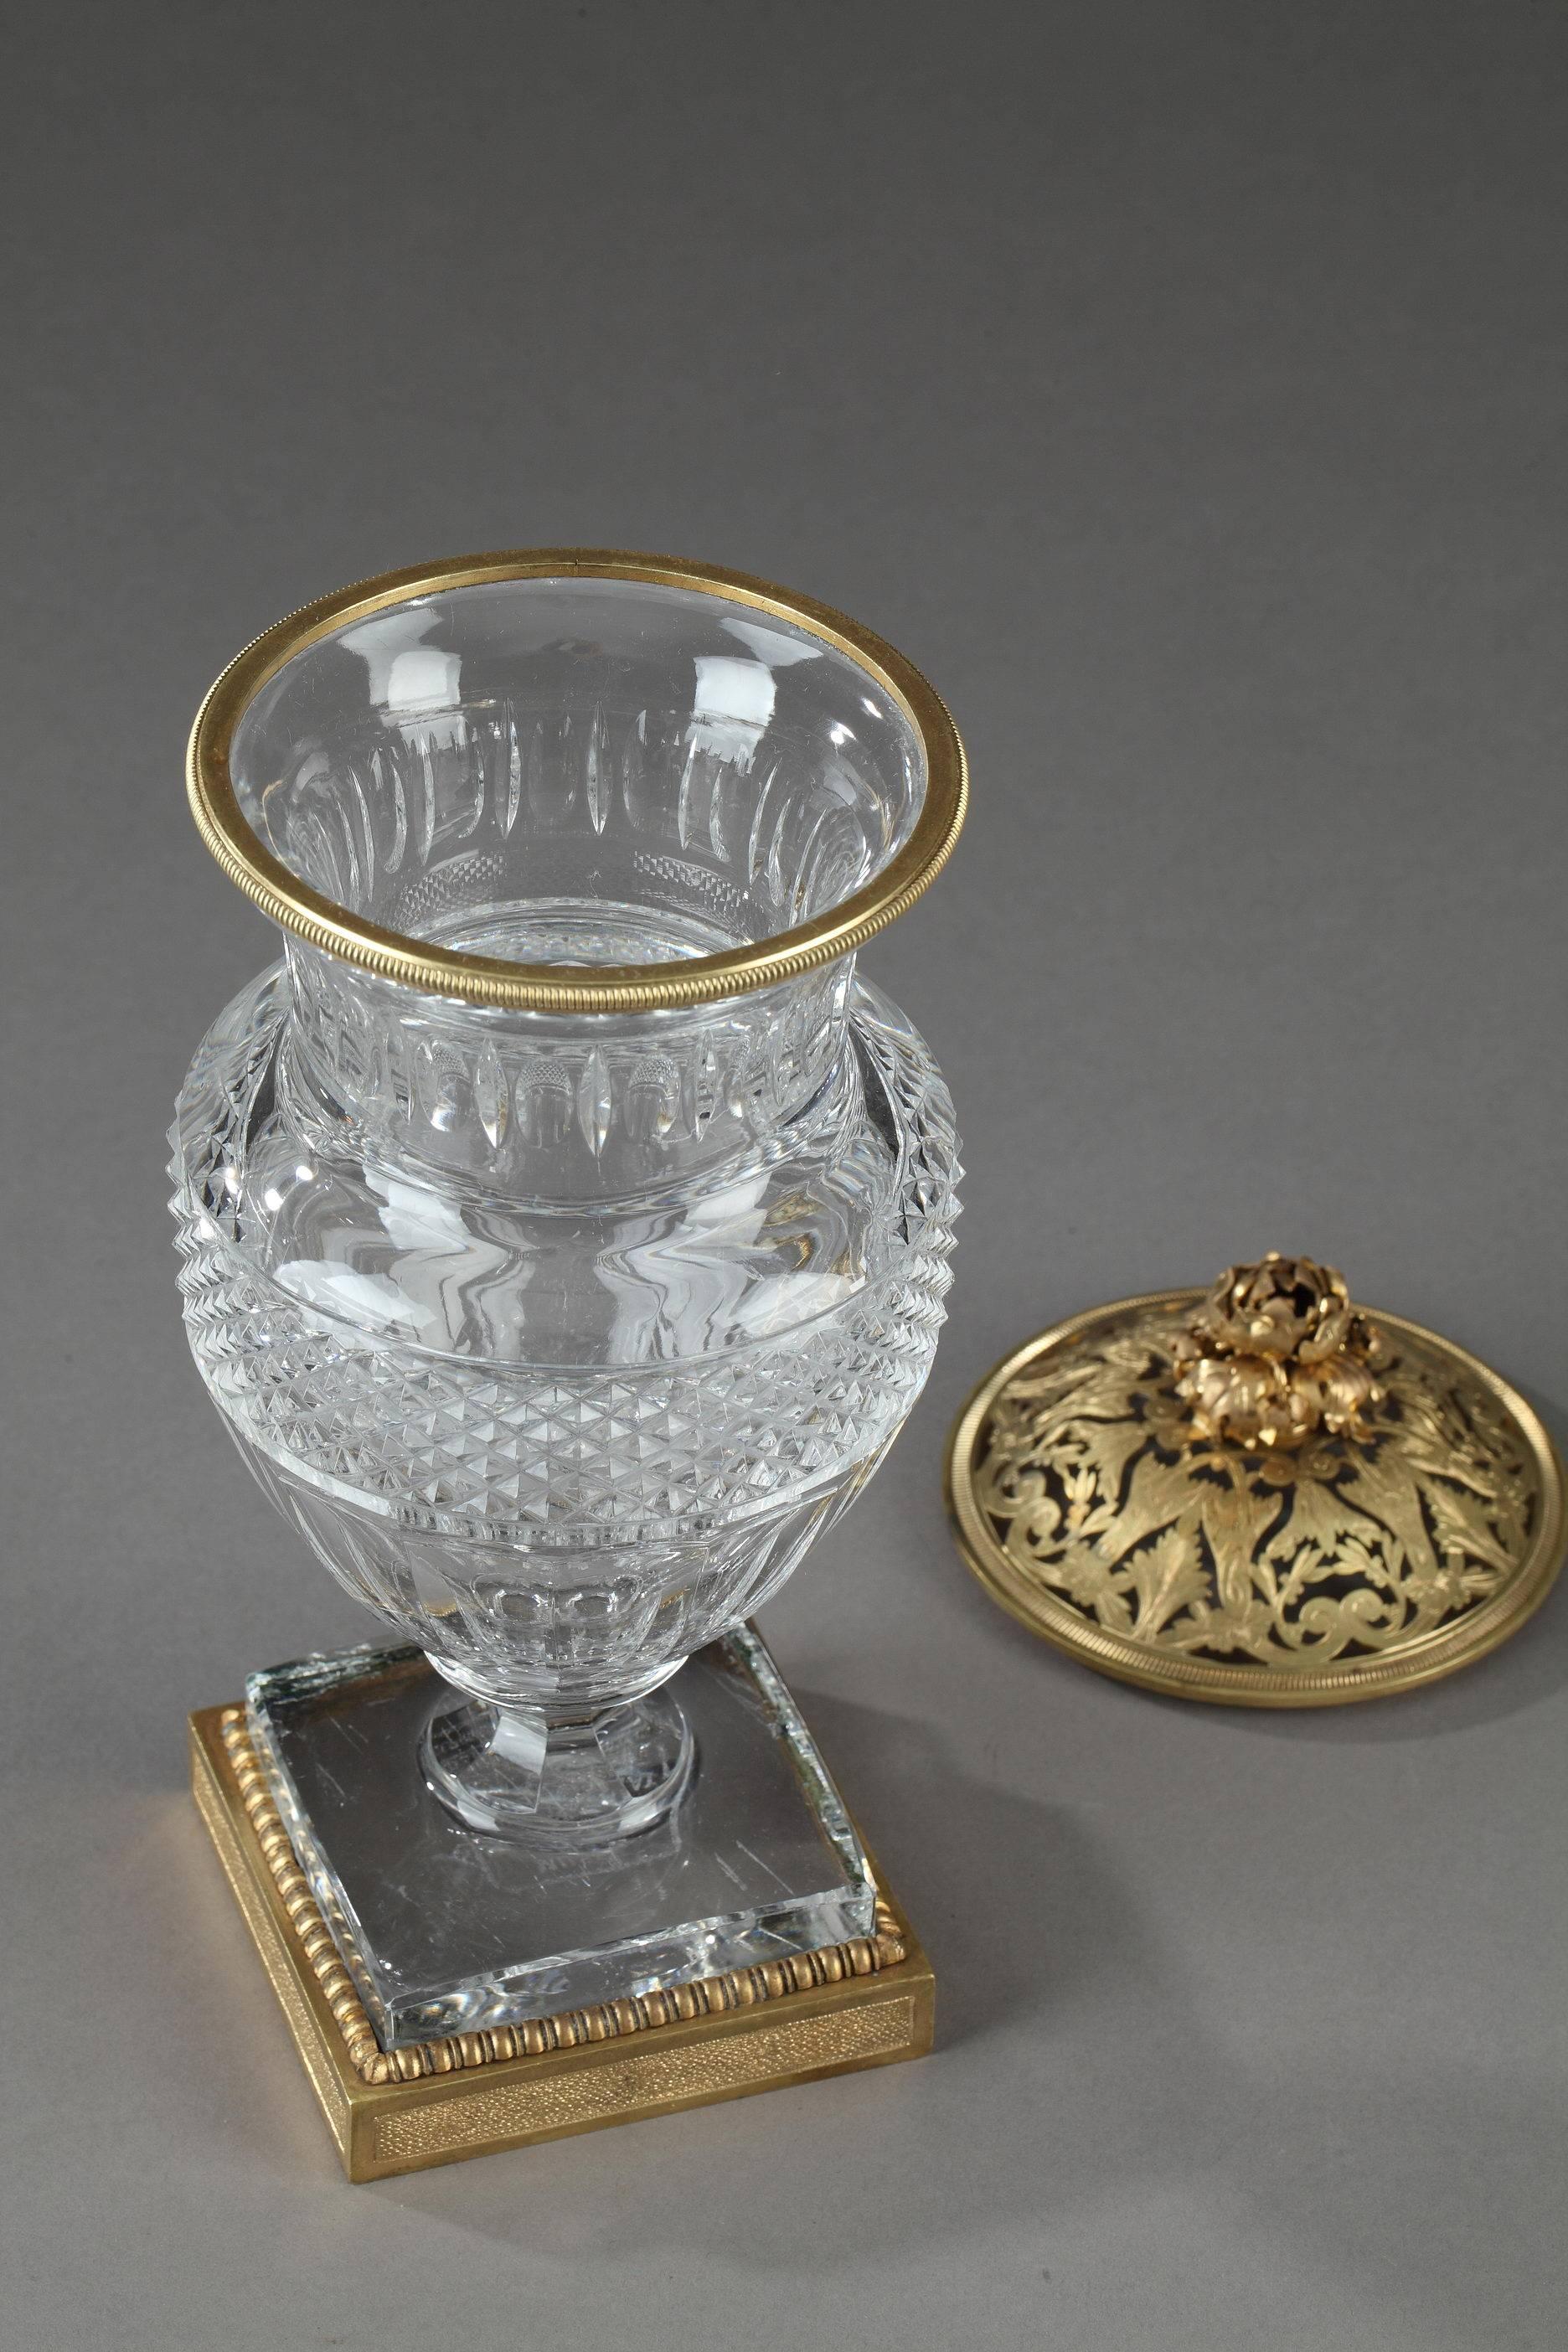 Baluster vase in cut crystal decorated with straight cuts and diamond points. The openwork cover, in gilt bronze, is embellished with acanthus leaves, intertwined scrollwork, and is topped with a floral-shaped handle. Marked on the base: Musée des